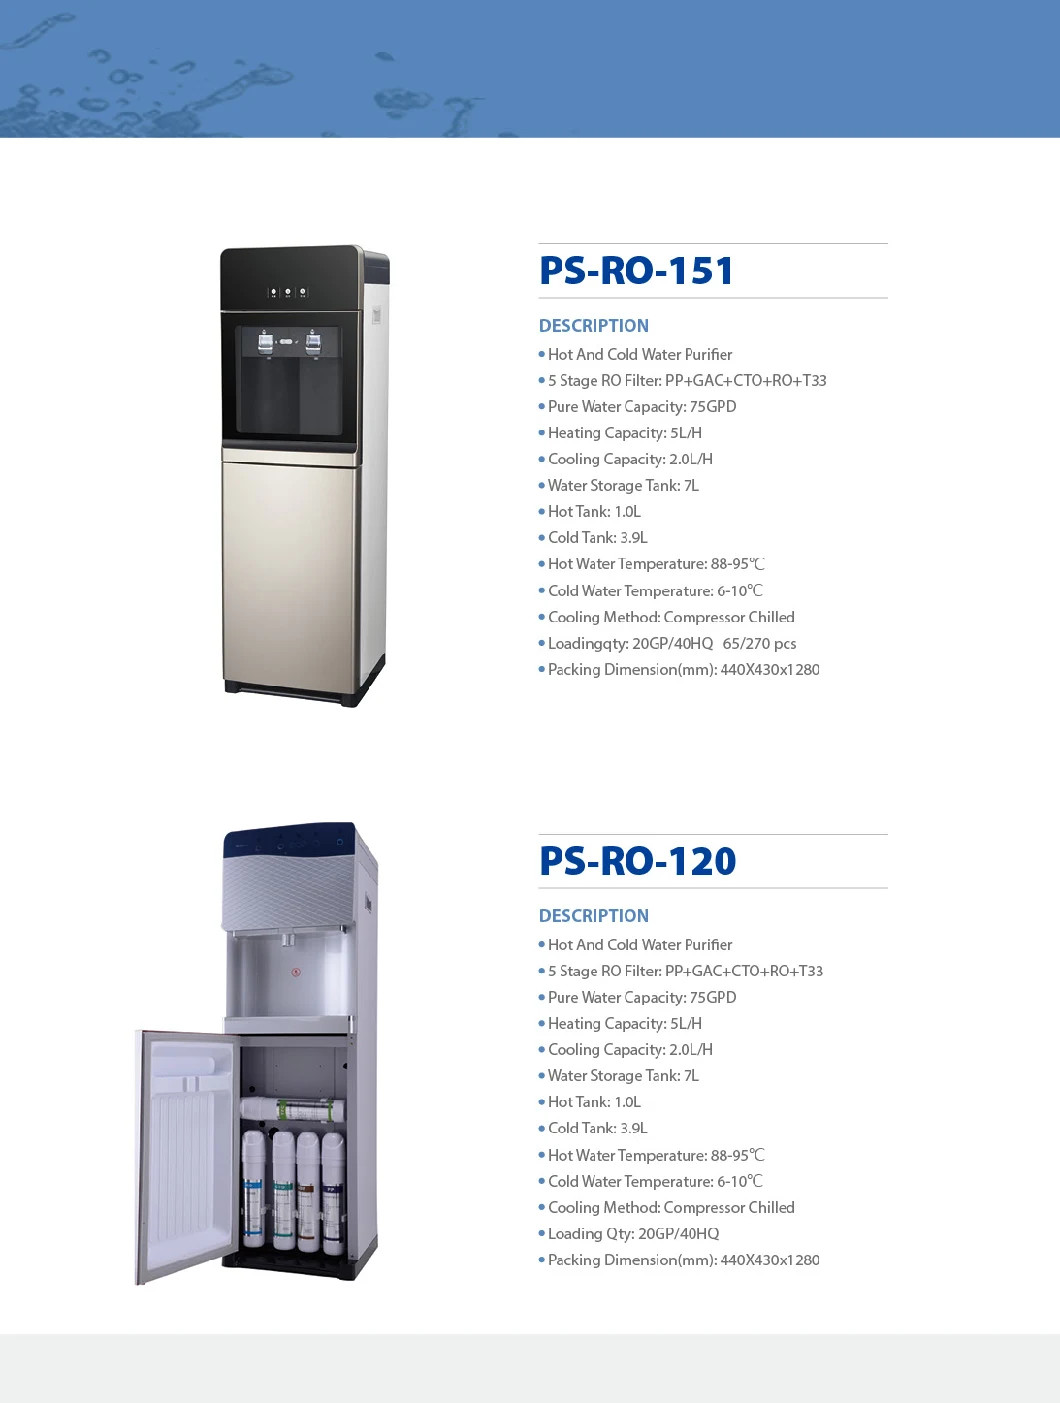 Hot and Clod Water Dispenser with RO Water Purifier/Floor Standing Hot and Cold Water Dispenser / Compressor Vertical Water Dispenser / Filter / Water Cooler